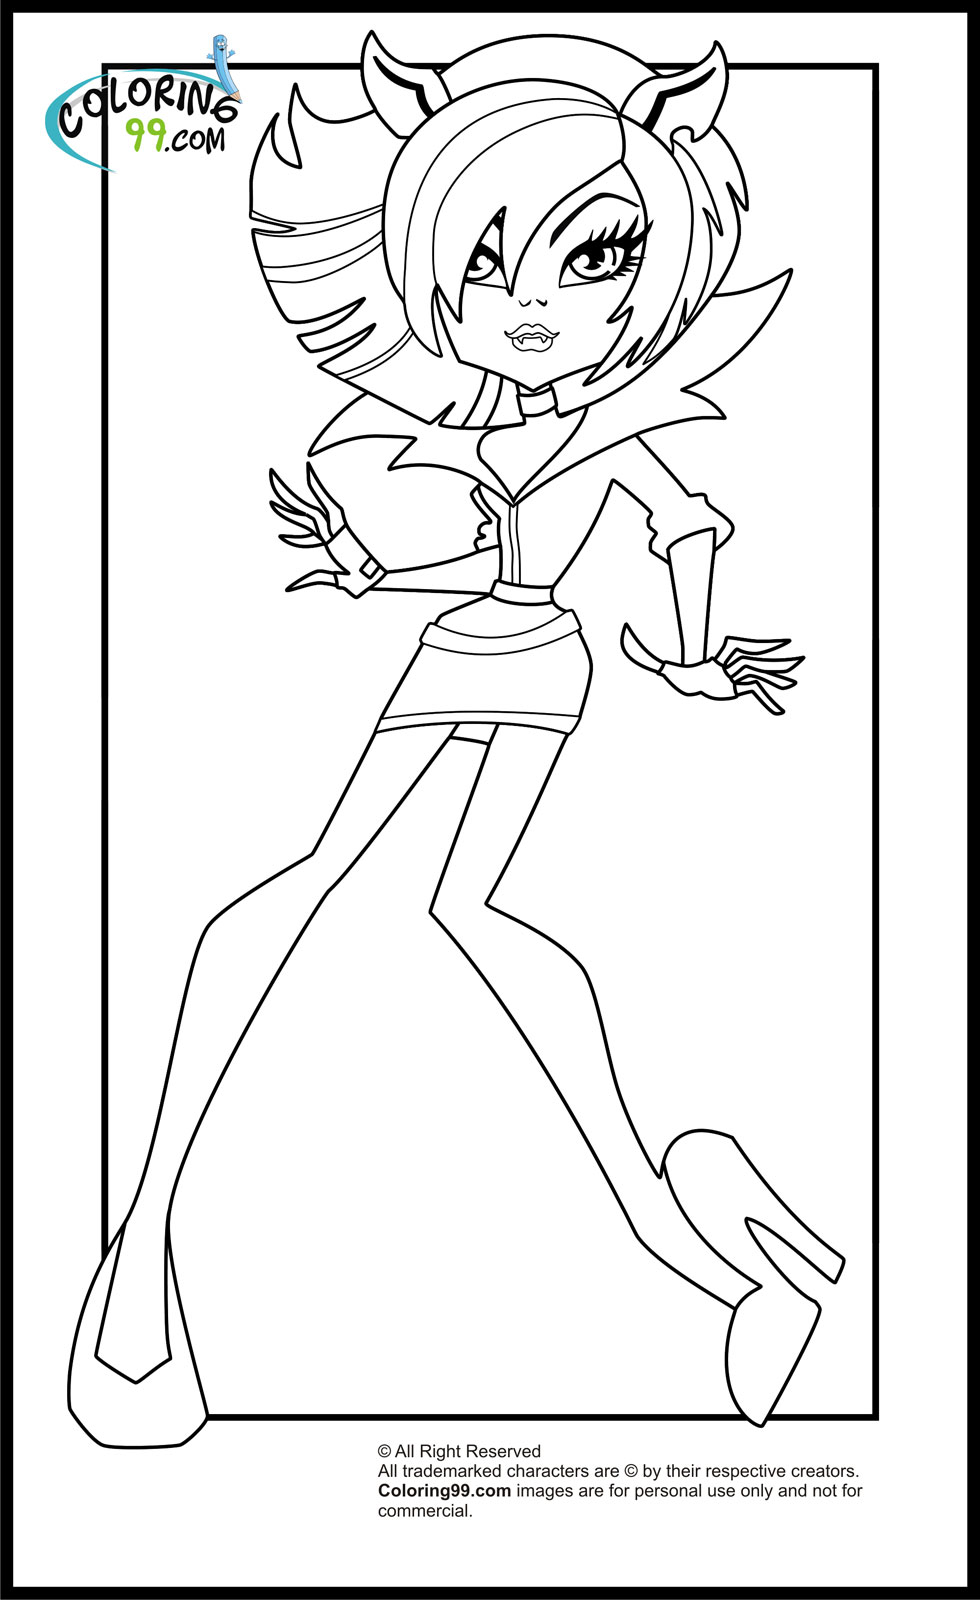 Clawdeen wolf coloring page from Team Colors